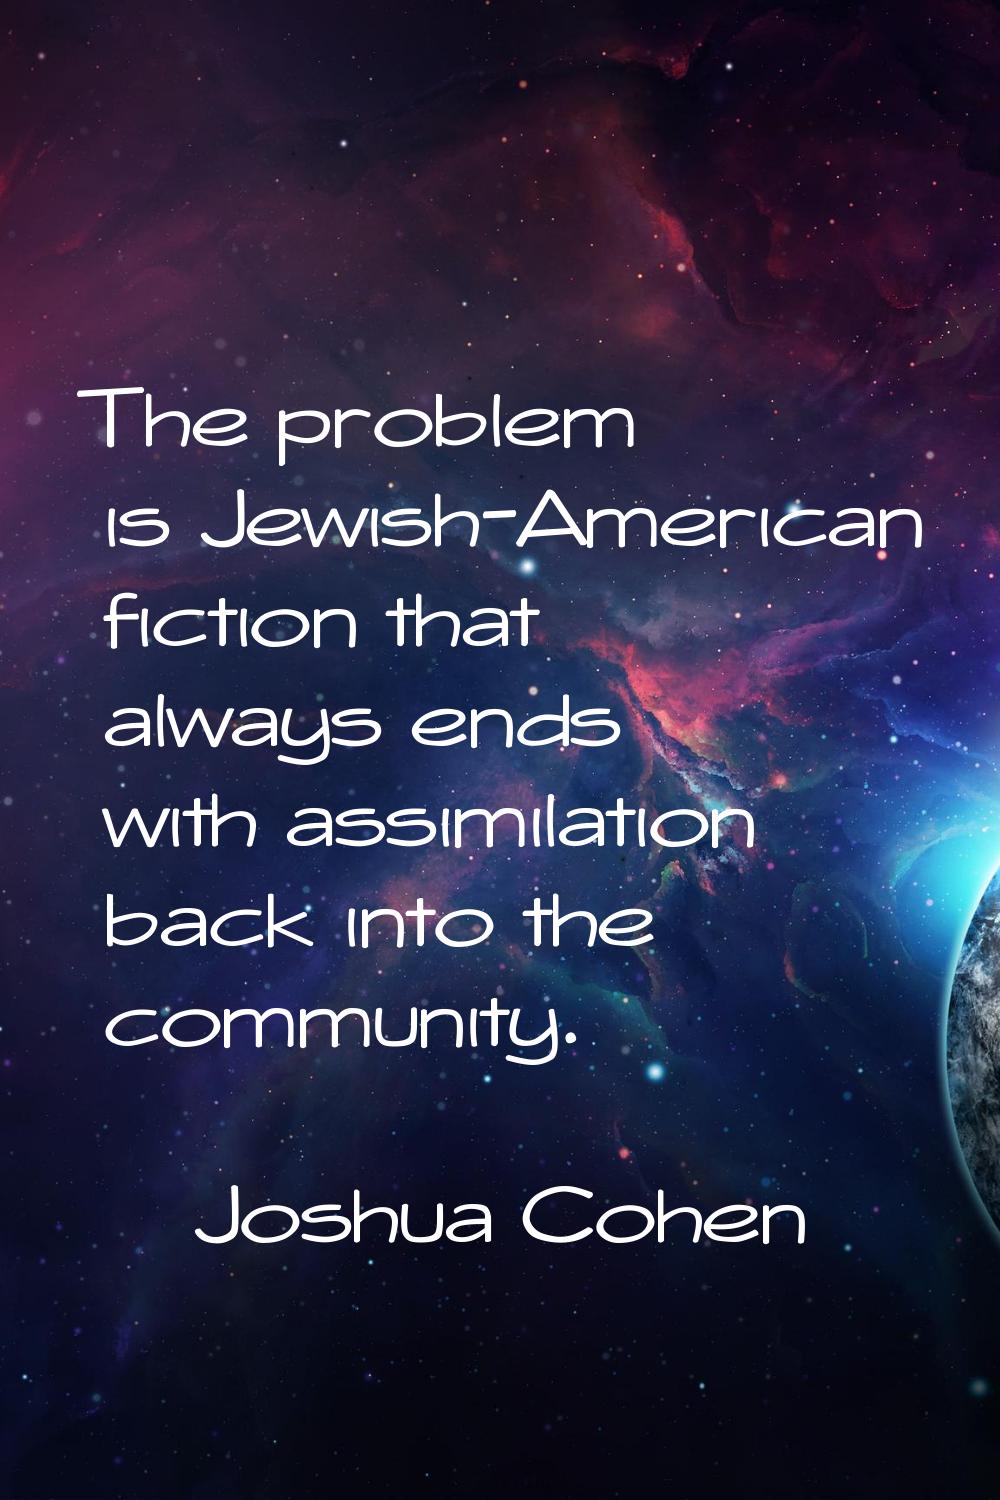 The problem is Jewish-American fiction that always ends with assimilation back into the community.